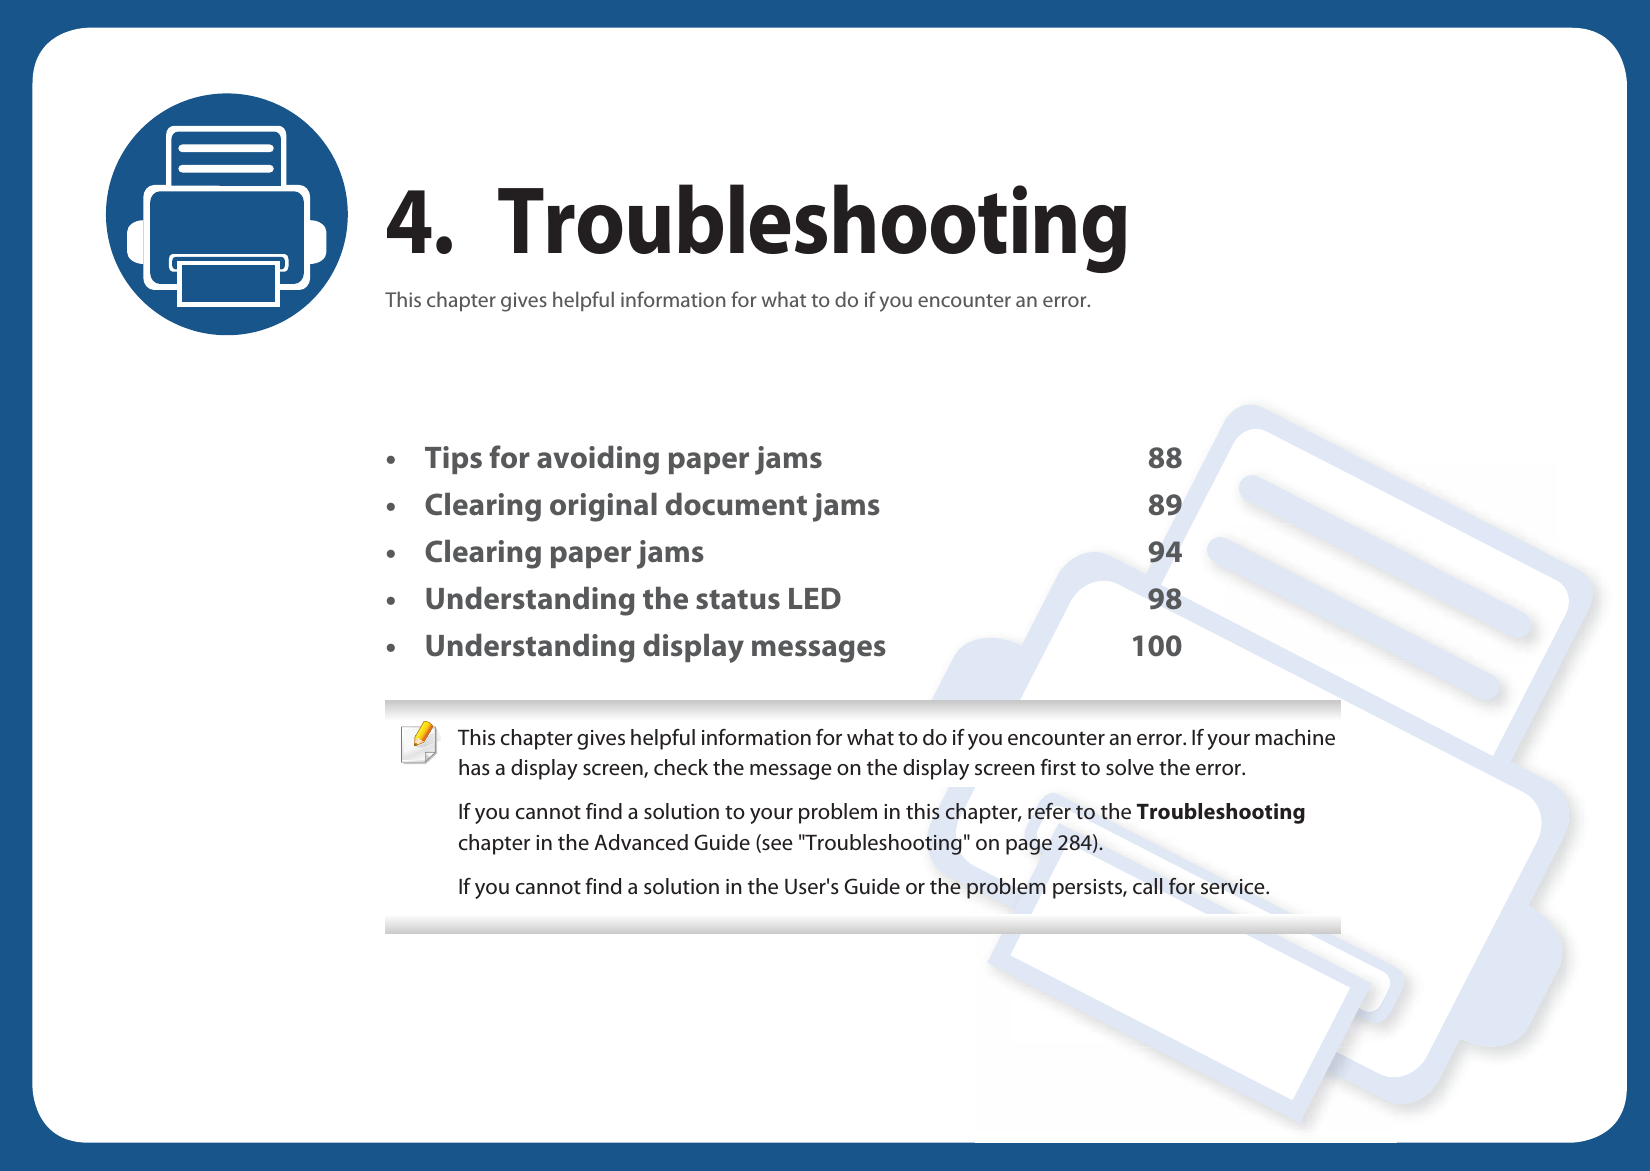 4. TroubleshootingThis chapter gives helpful information for what to do if you encounter an error.• Tips for avoiding paper jams 88• Clearing original document jams 89• Clearing paper jams 94• Understanding the status LED 98• Understanding display messages 100 This chapter gives helpful information for what to do if you encounter an error. If your machine has a display screen, check the message on the display screen first to solve the error.If you cannot find a solution to your problem in this chapter, refer to the Troubleshooting chapter in the Advanced Guide (see &quot;Troubleshooting&quot; on page 284).If you cannot find a solution in the User&apos;s Guide or the problem persists, call for service.  